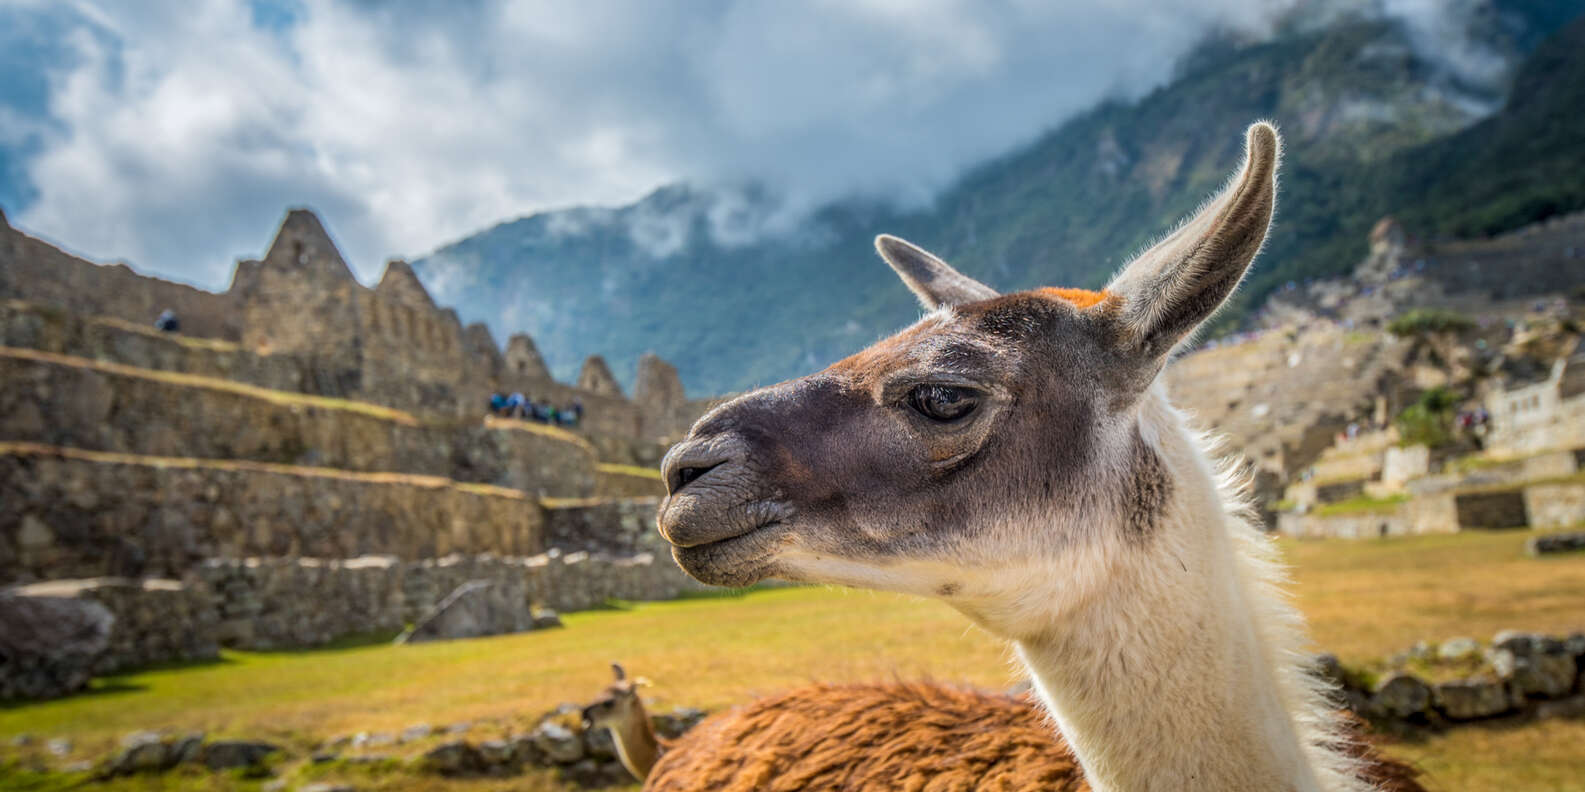 things to do in Cusco